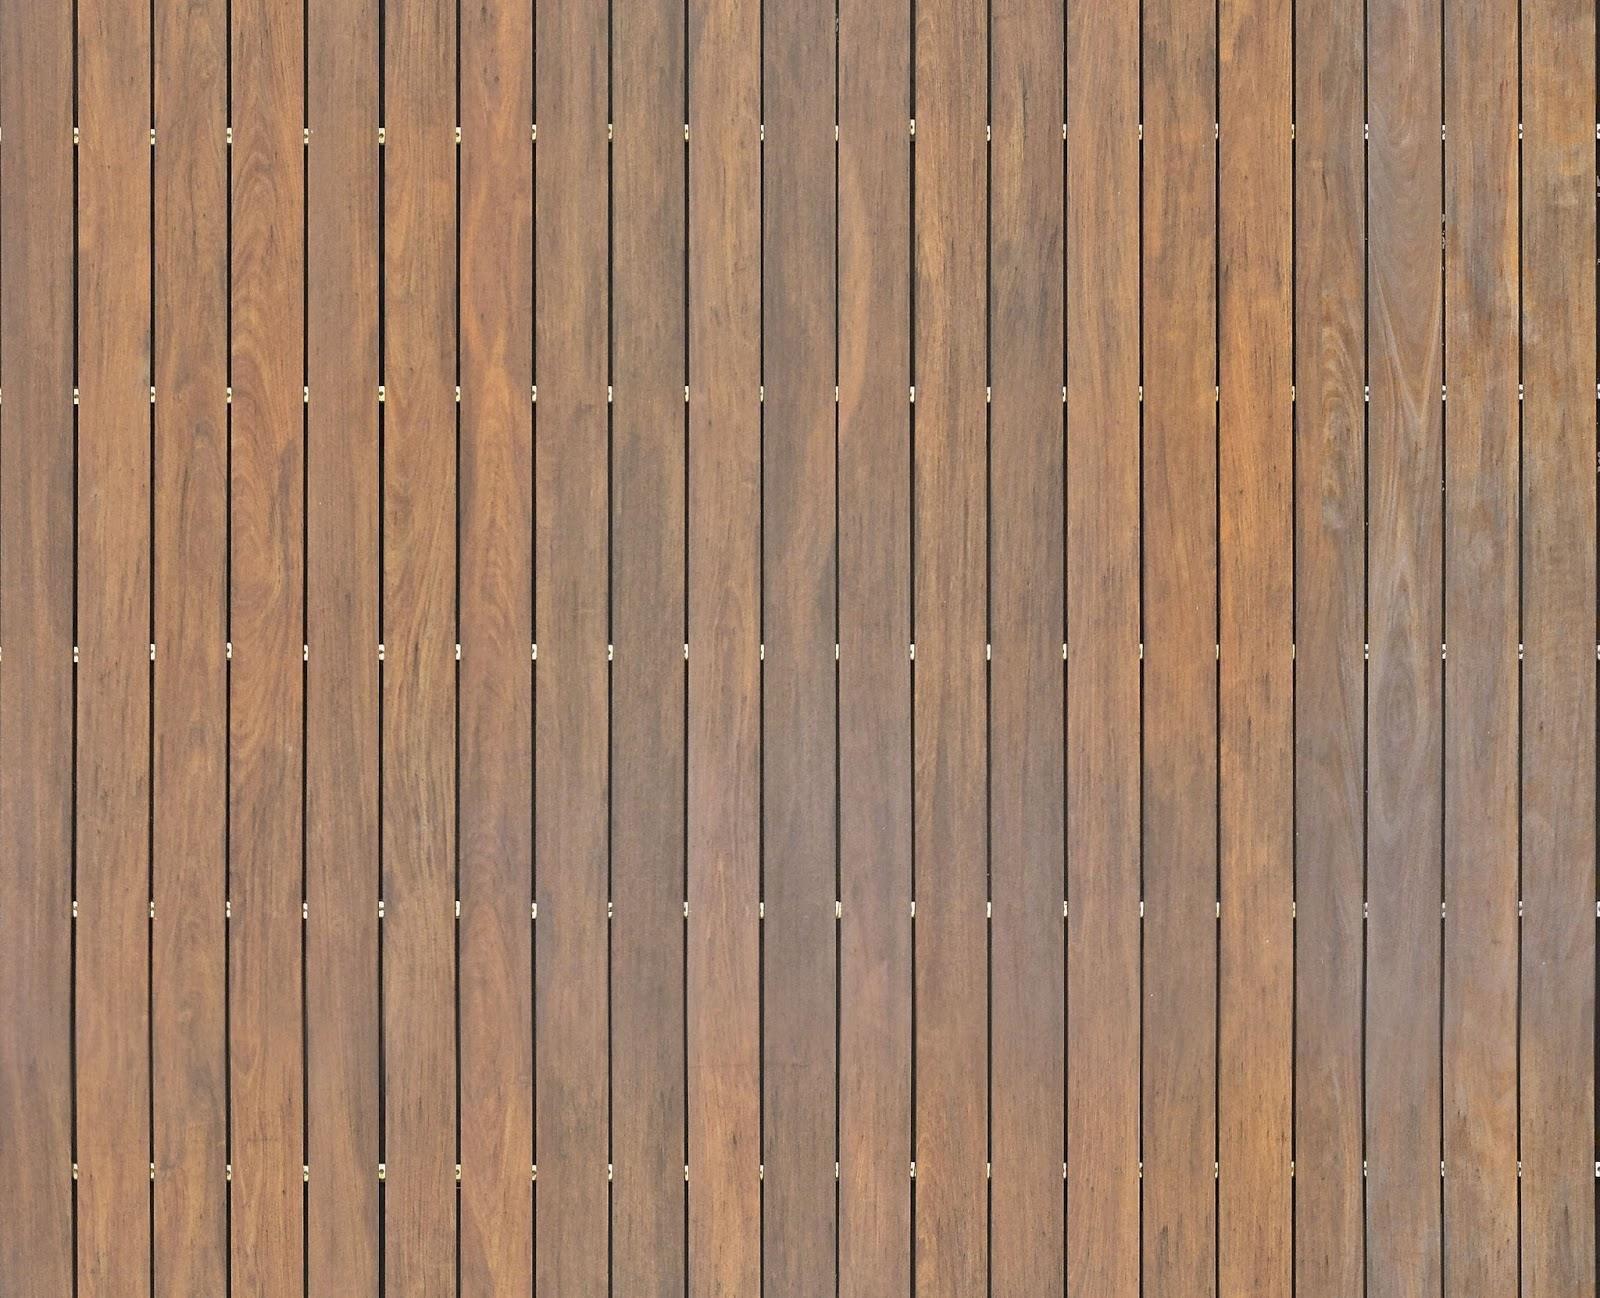 Tileable Wooden Deck Boards Texture Maps Texturise Free pertaining to sizing 1600 X 1298